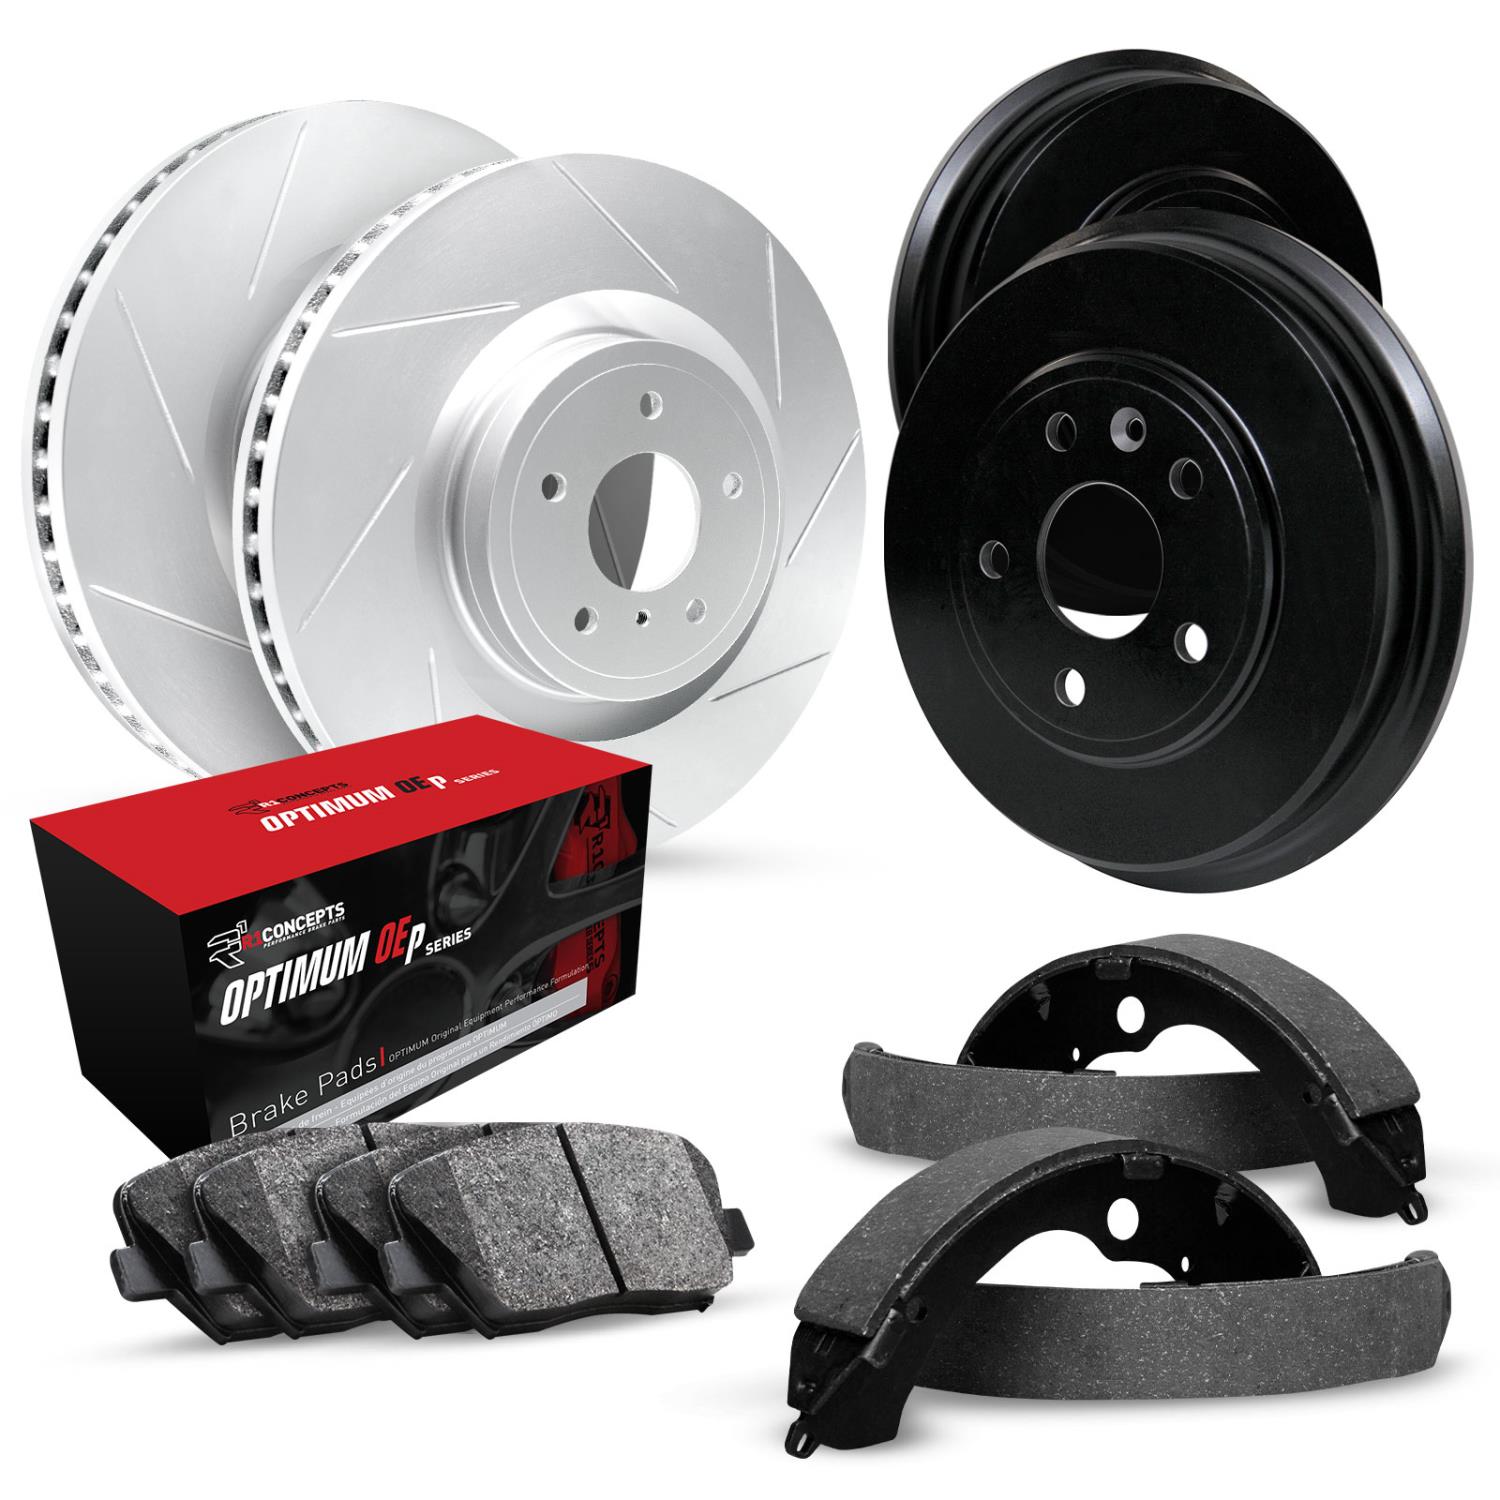 GEO-Carbon Slotted Brake Rotor & Drum Set w/Optimum OE Pads & Shoes, 1992-2001 Lexus/Toyota/Scion, Position: Front & Rear